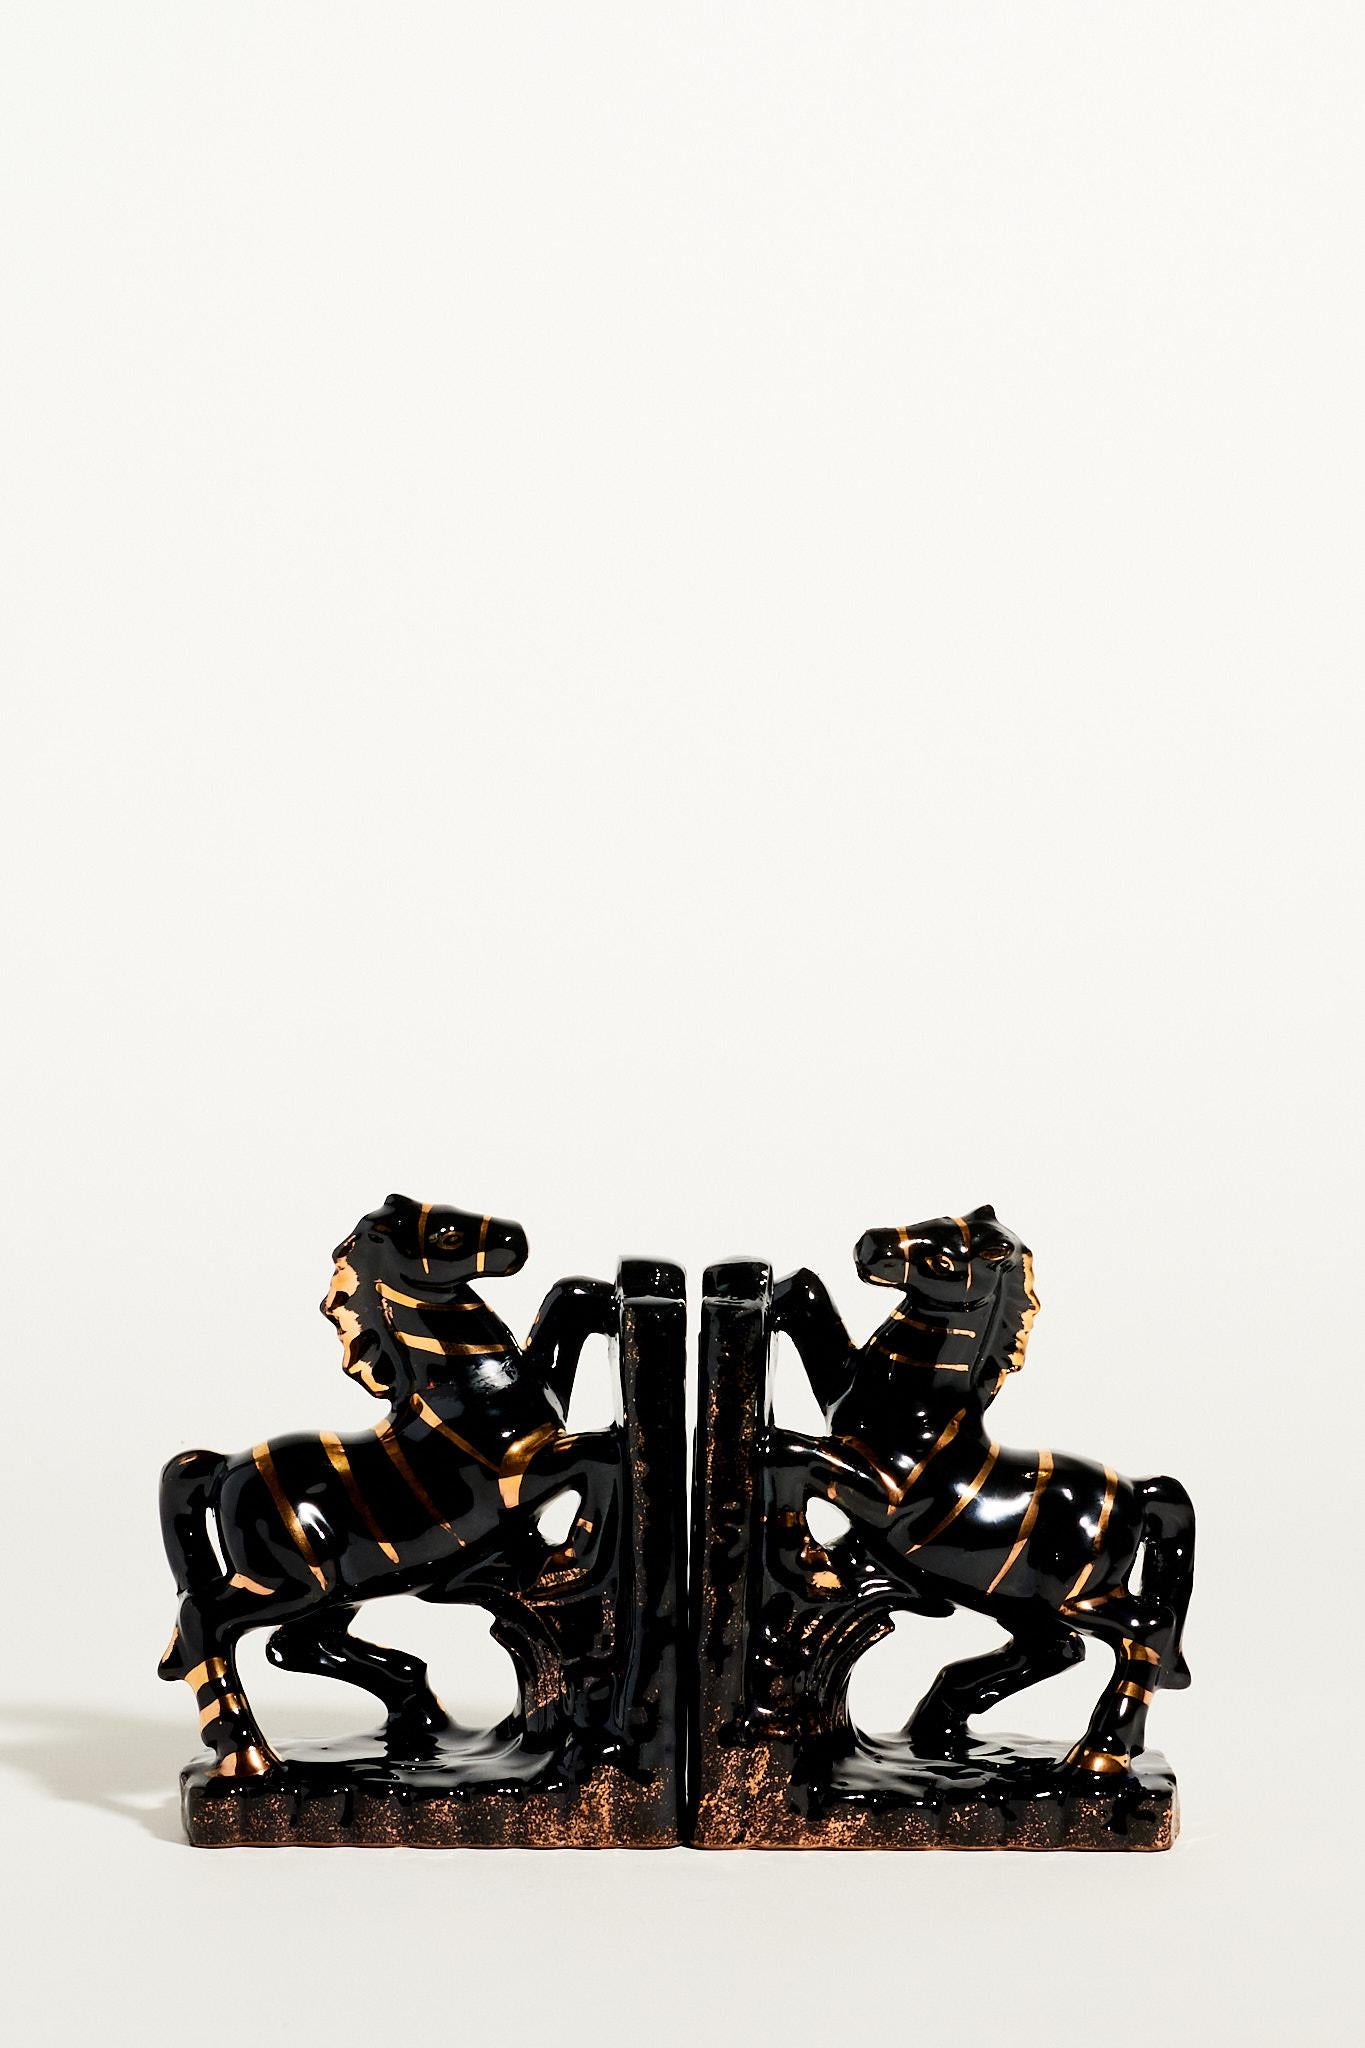 Black ceramic rearing horse bookends with metallic gold decorative effects.